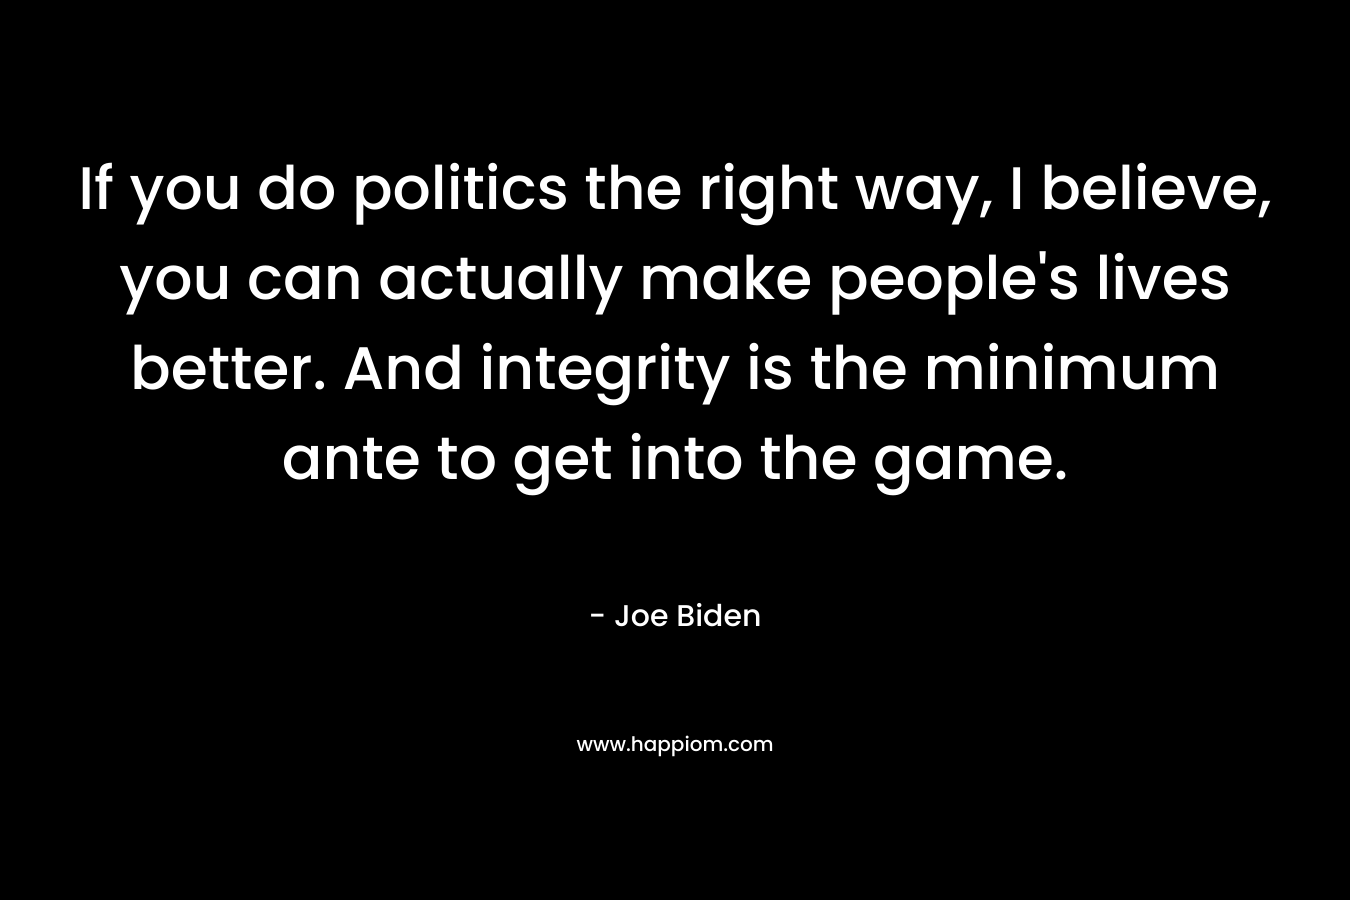 If you do politics the right way, I believe, you can actually make people’s lives better. And integrity is the minimum ante to get into the game. – Joe Biden